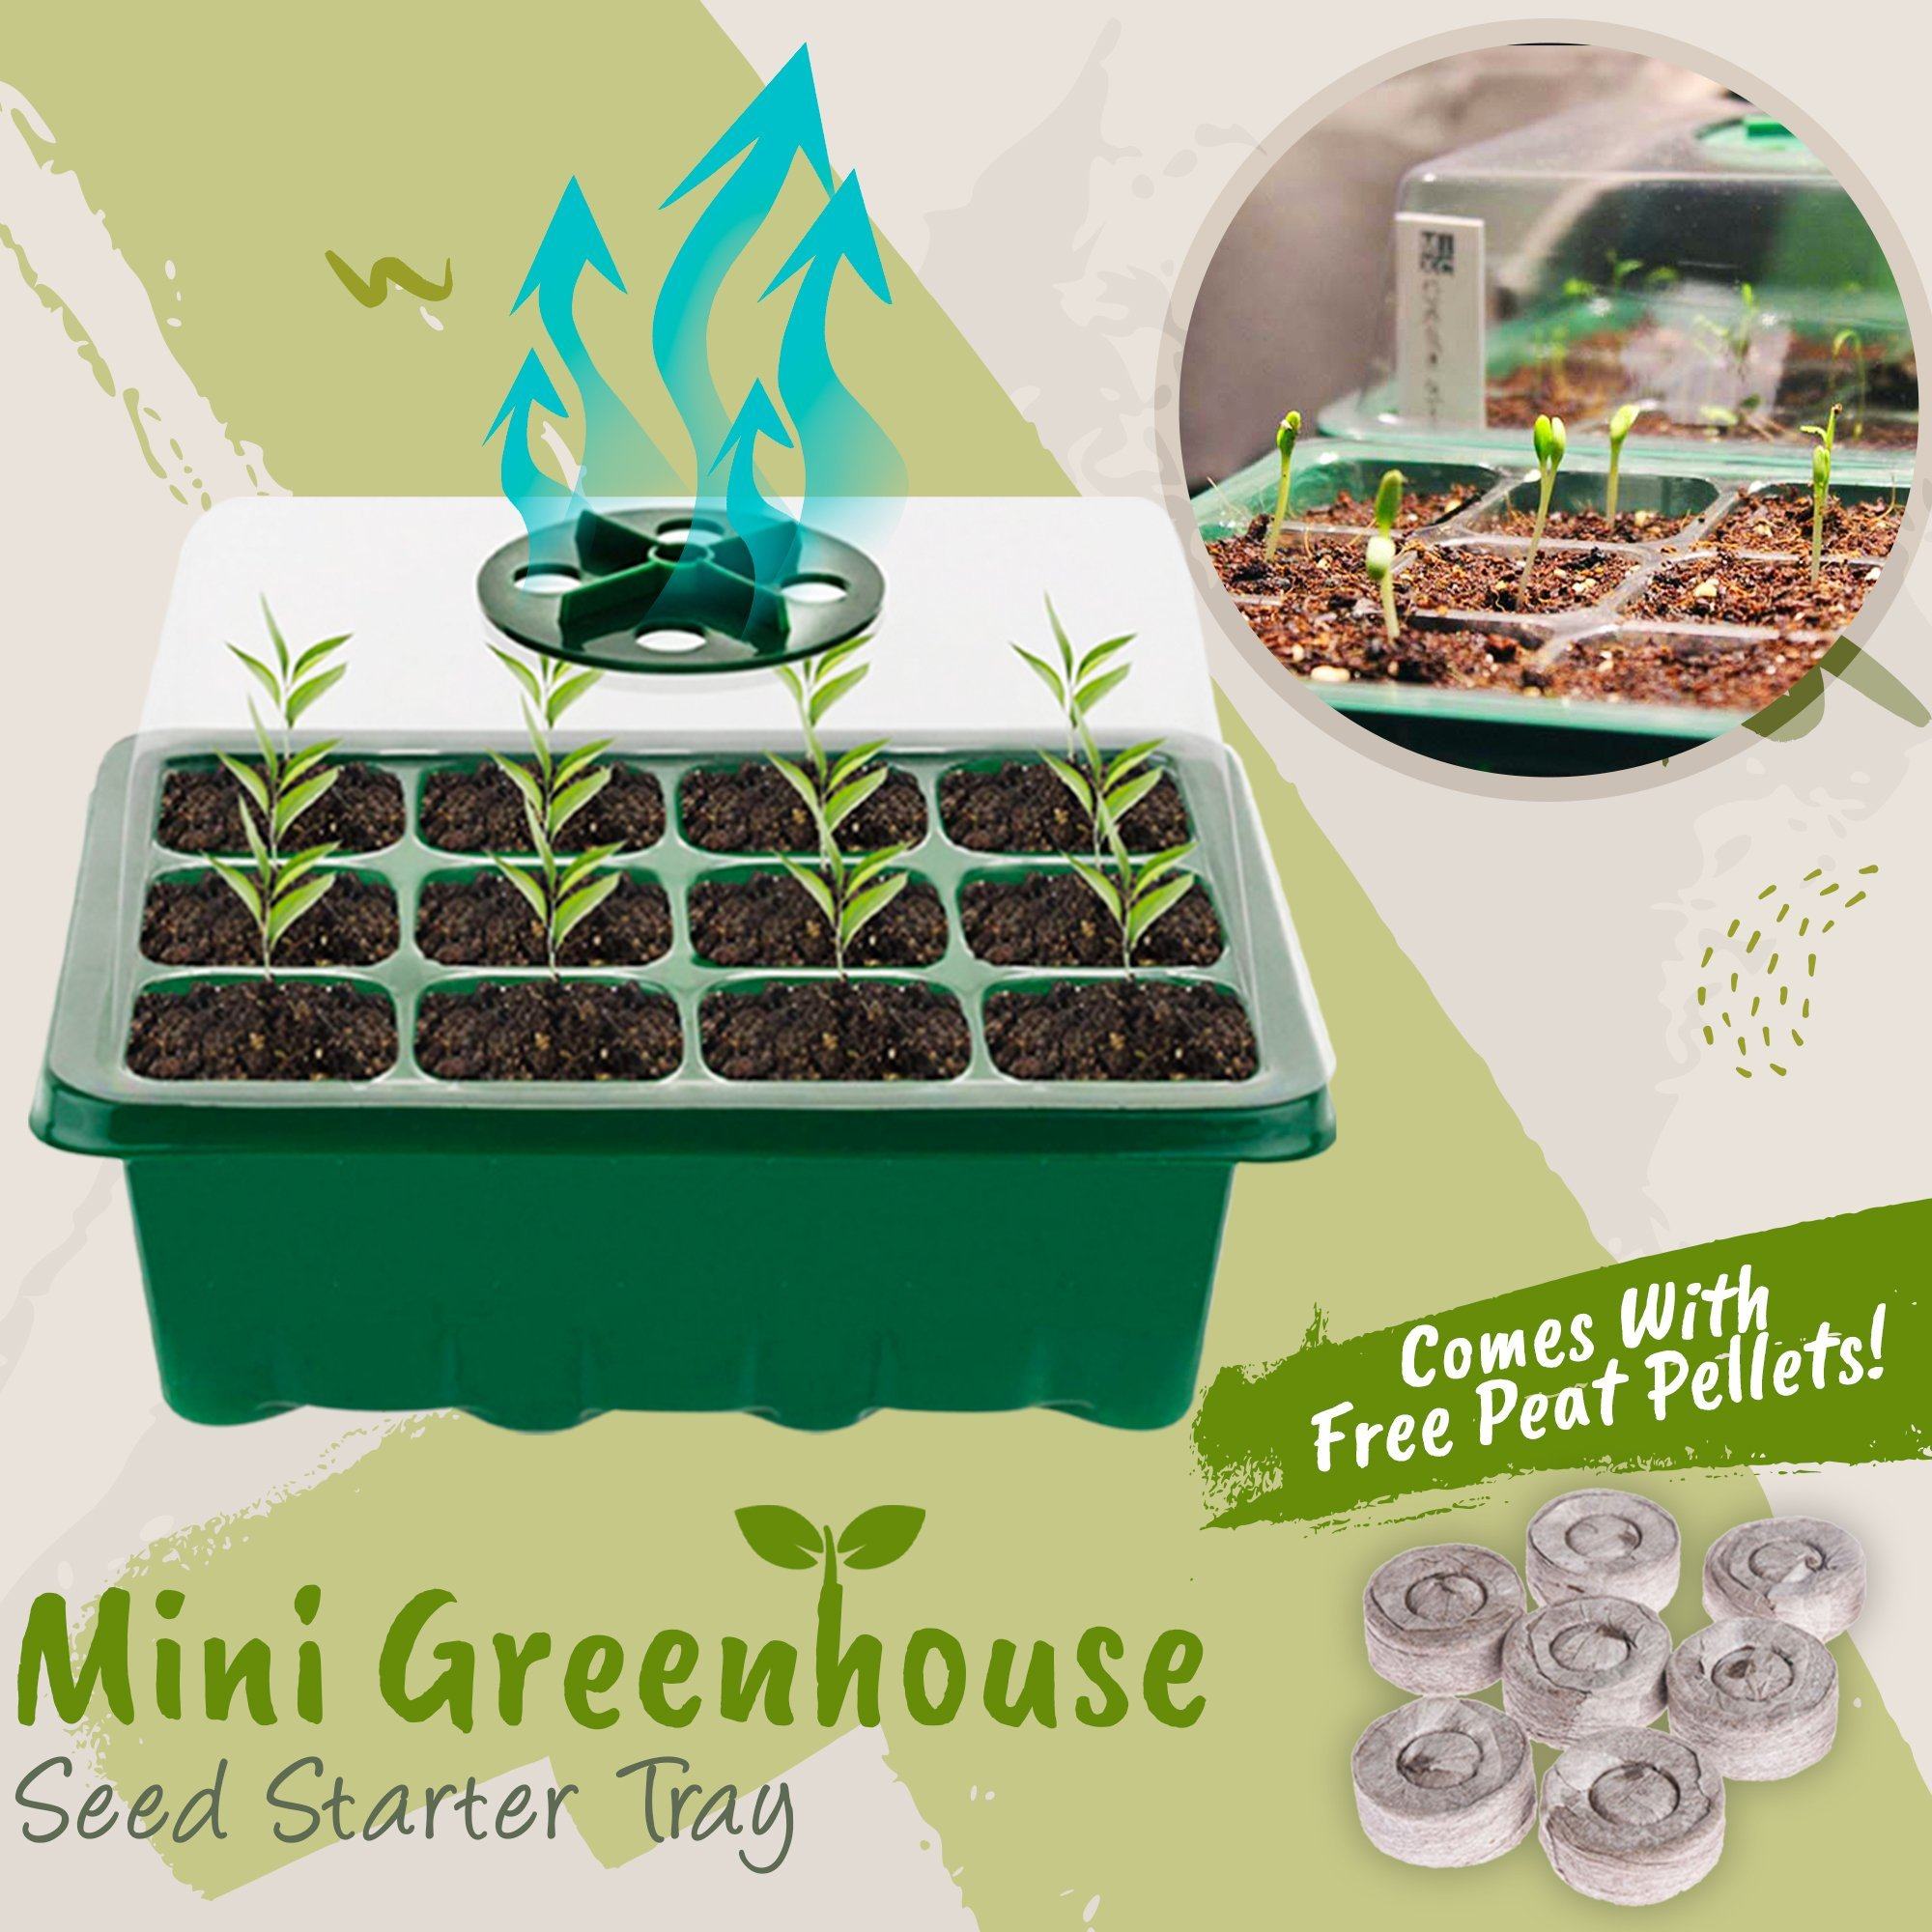 Mini Greenhouse Seed Starter Tray With Free Peat Pellets